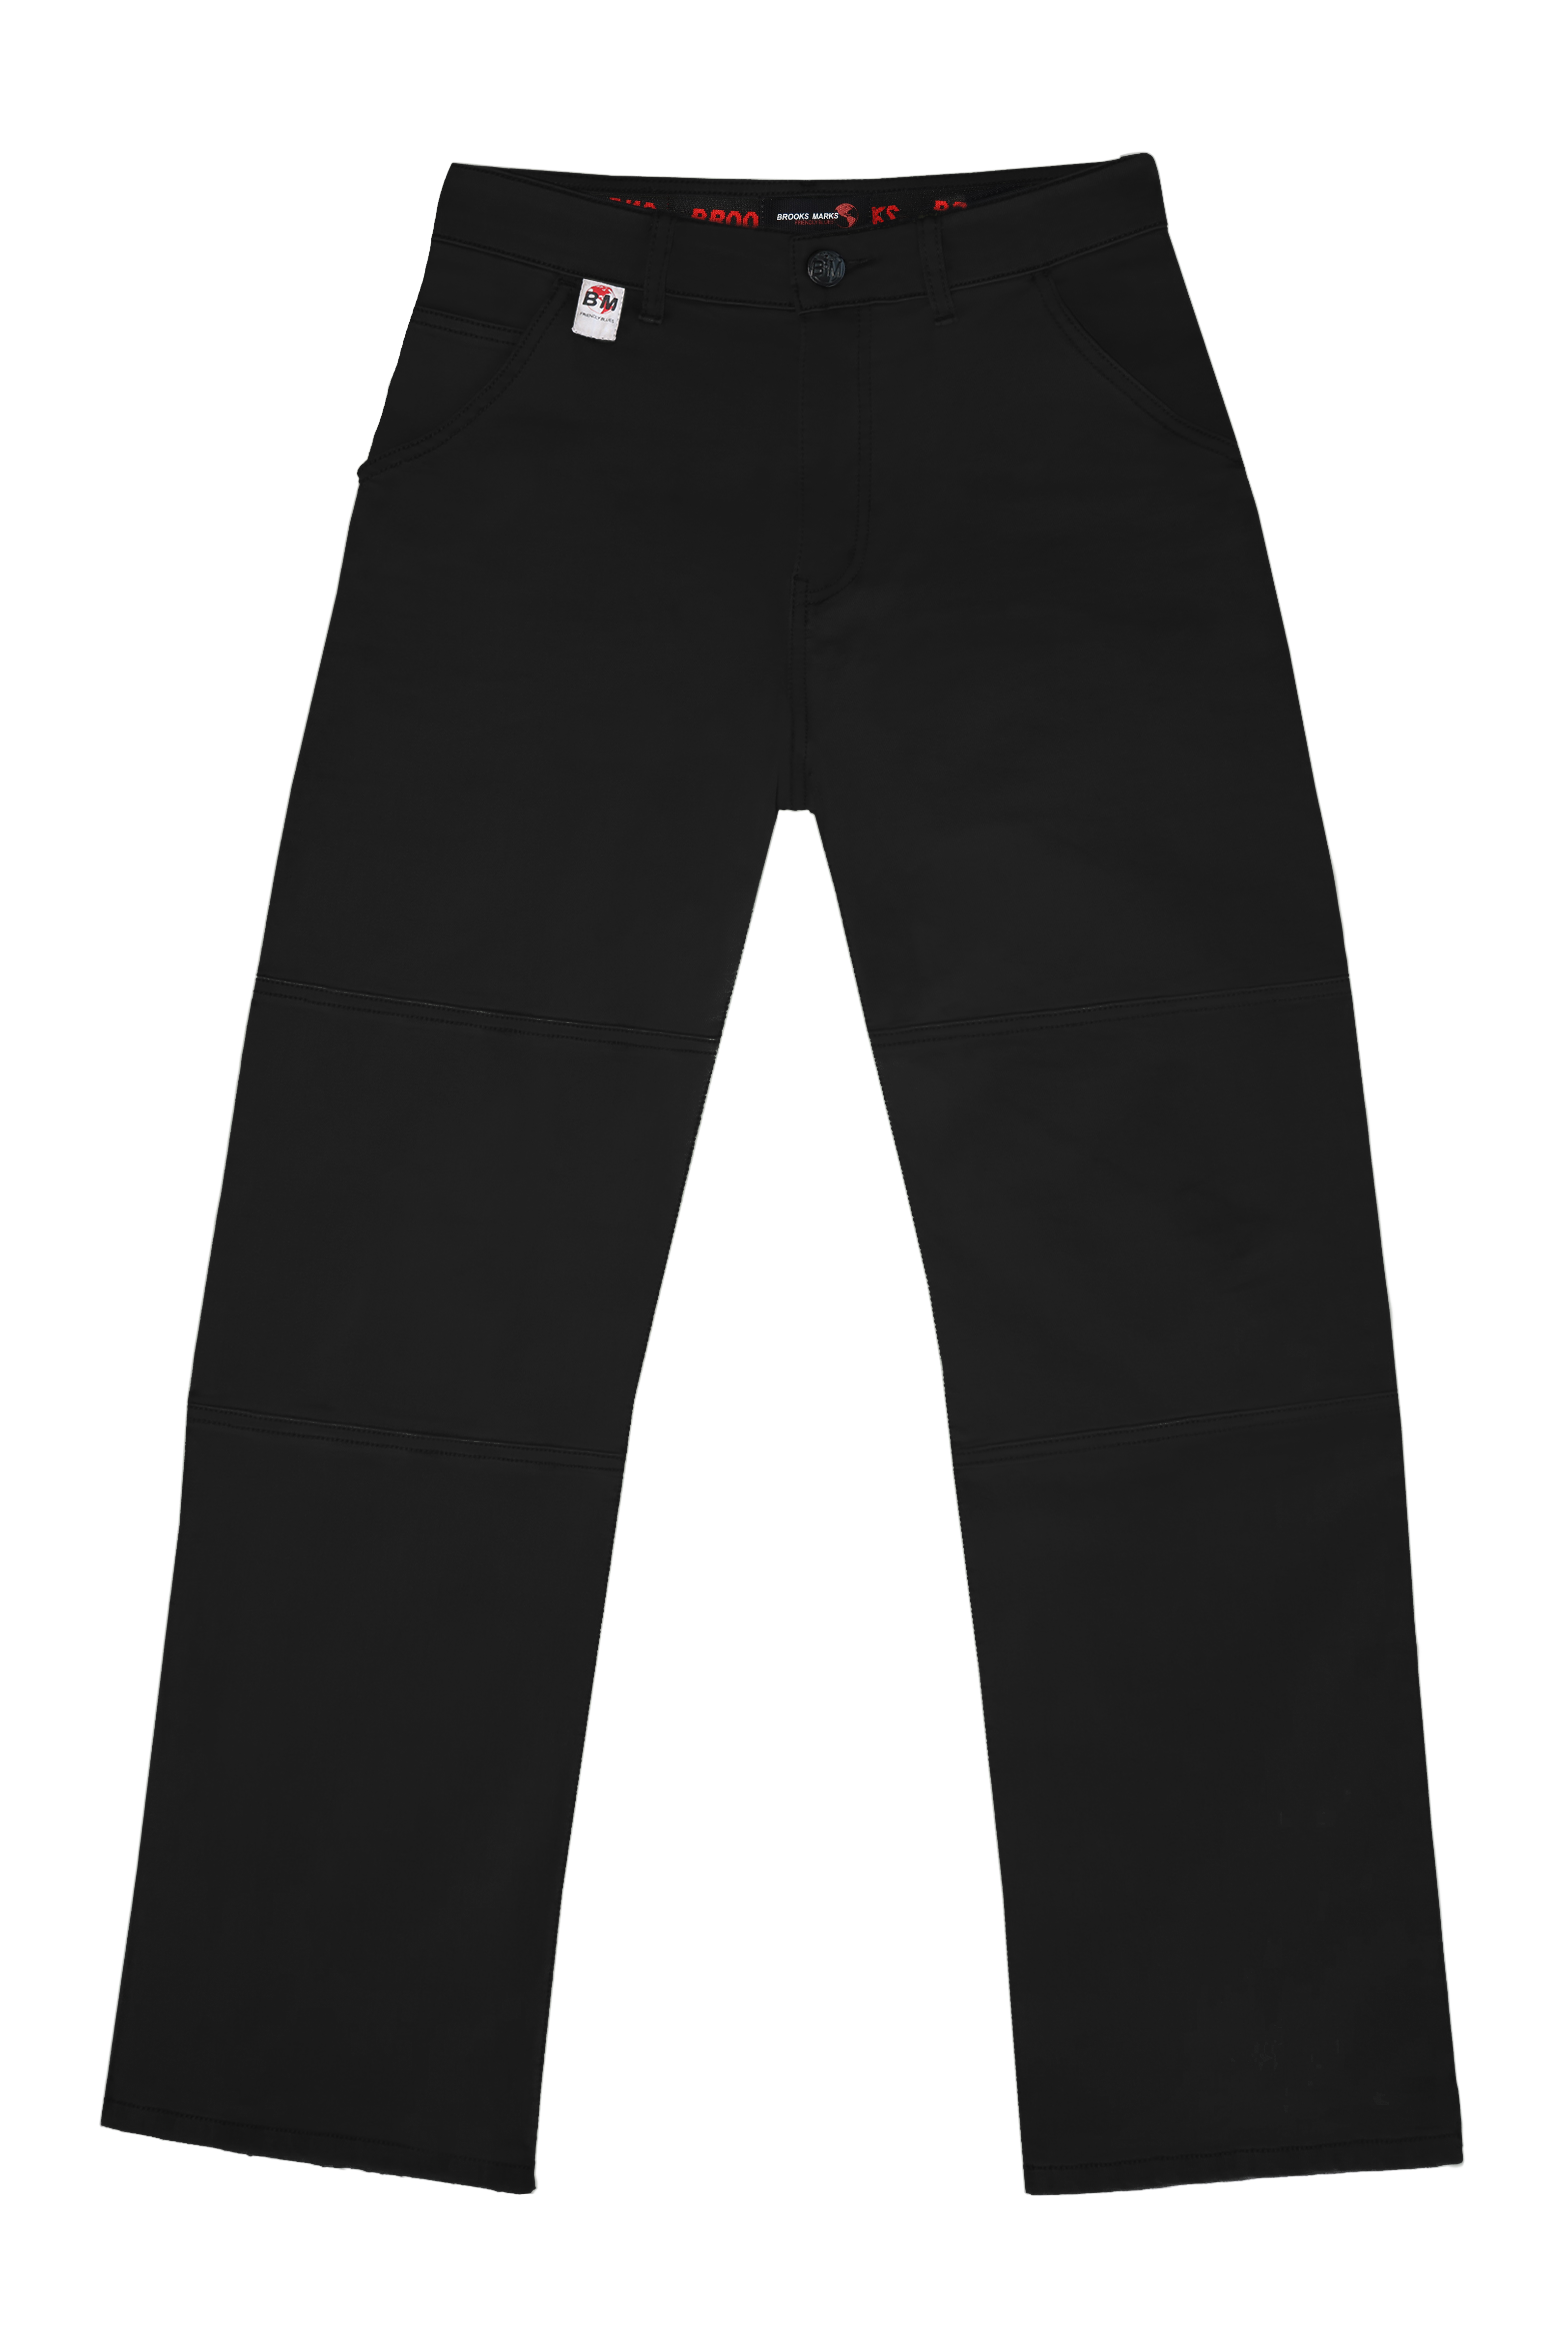 Open-Bottom Waffle Lounge Pants for Tall Women | American Tall